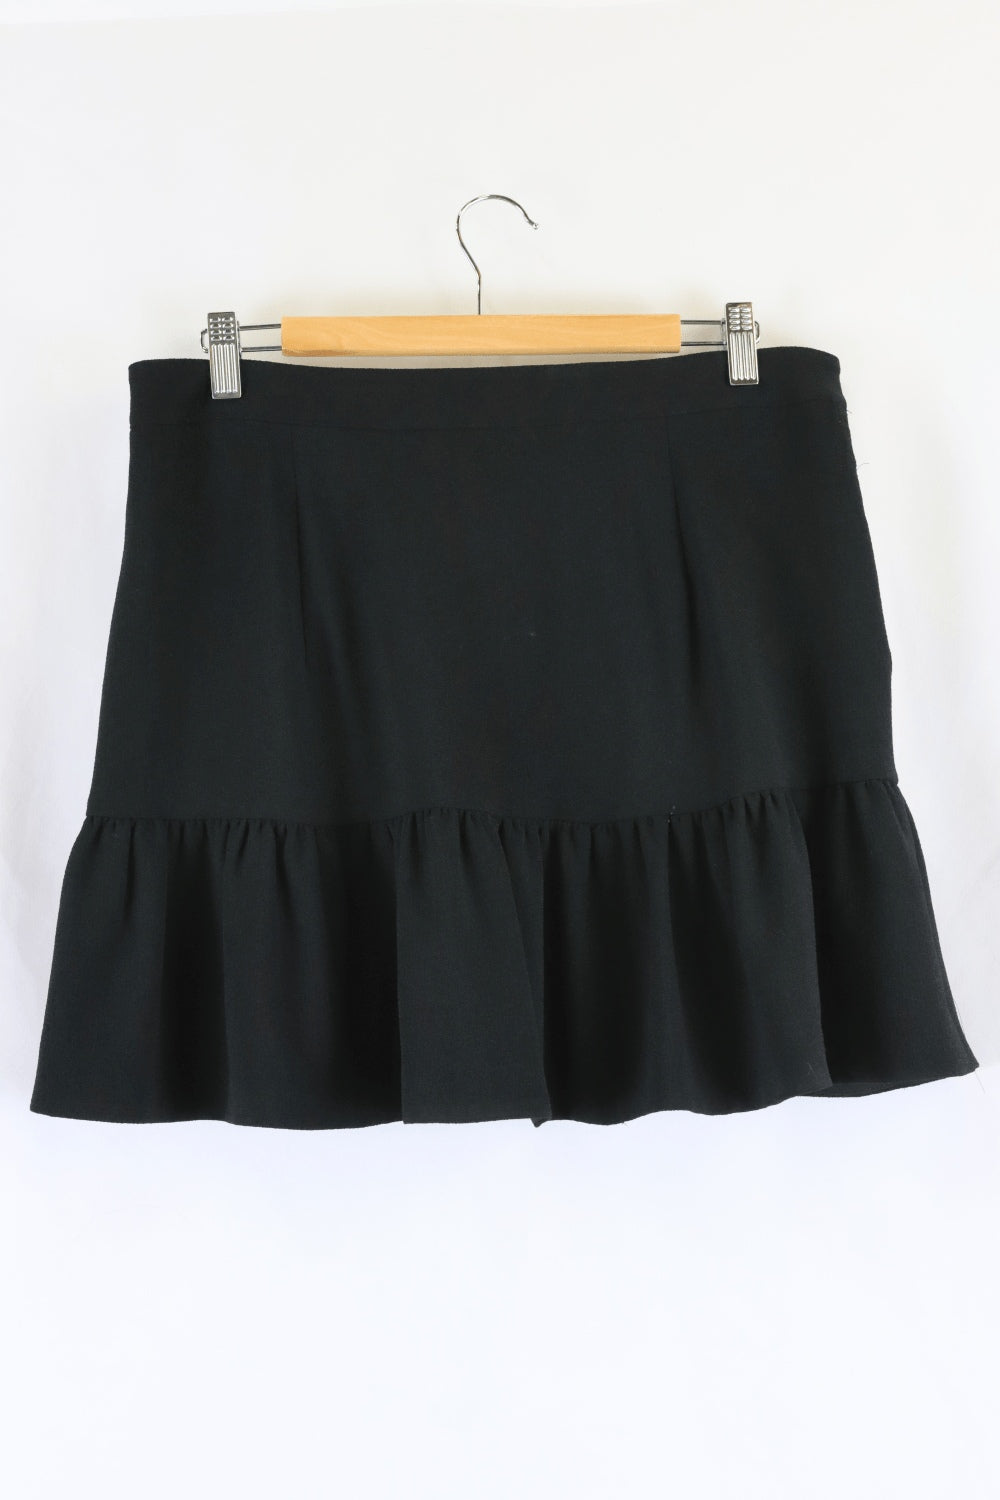 French Connection Black Skirt 12